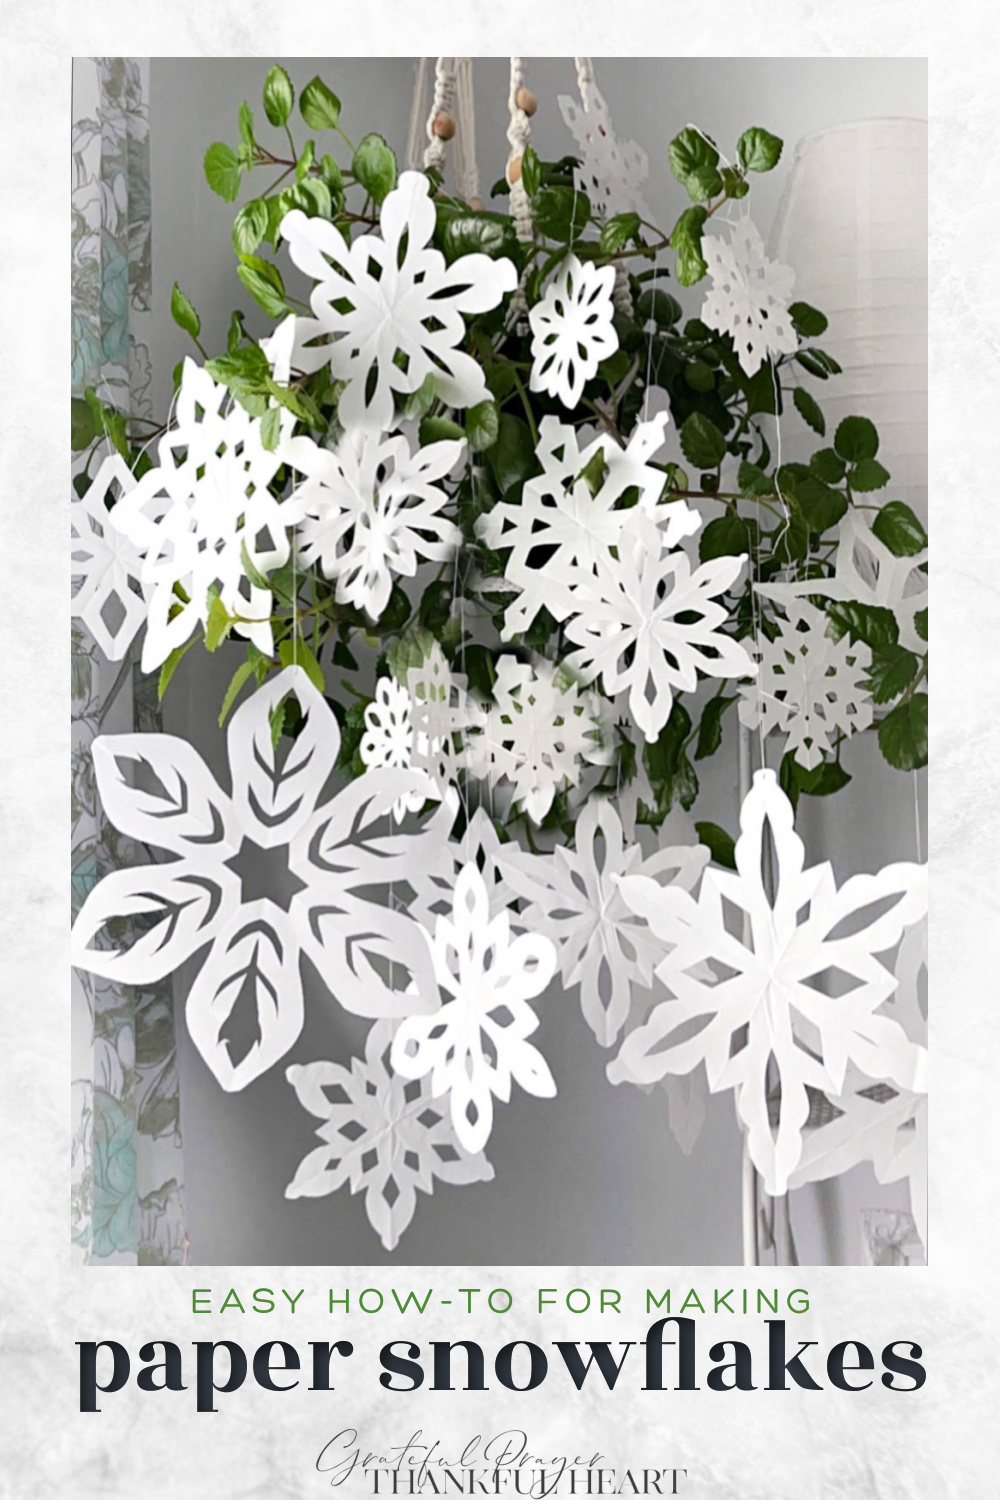 How To Make Paper Snowflakes - diy Thought